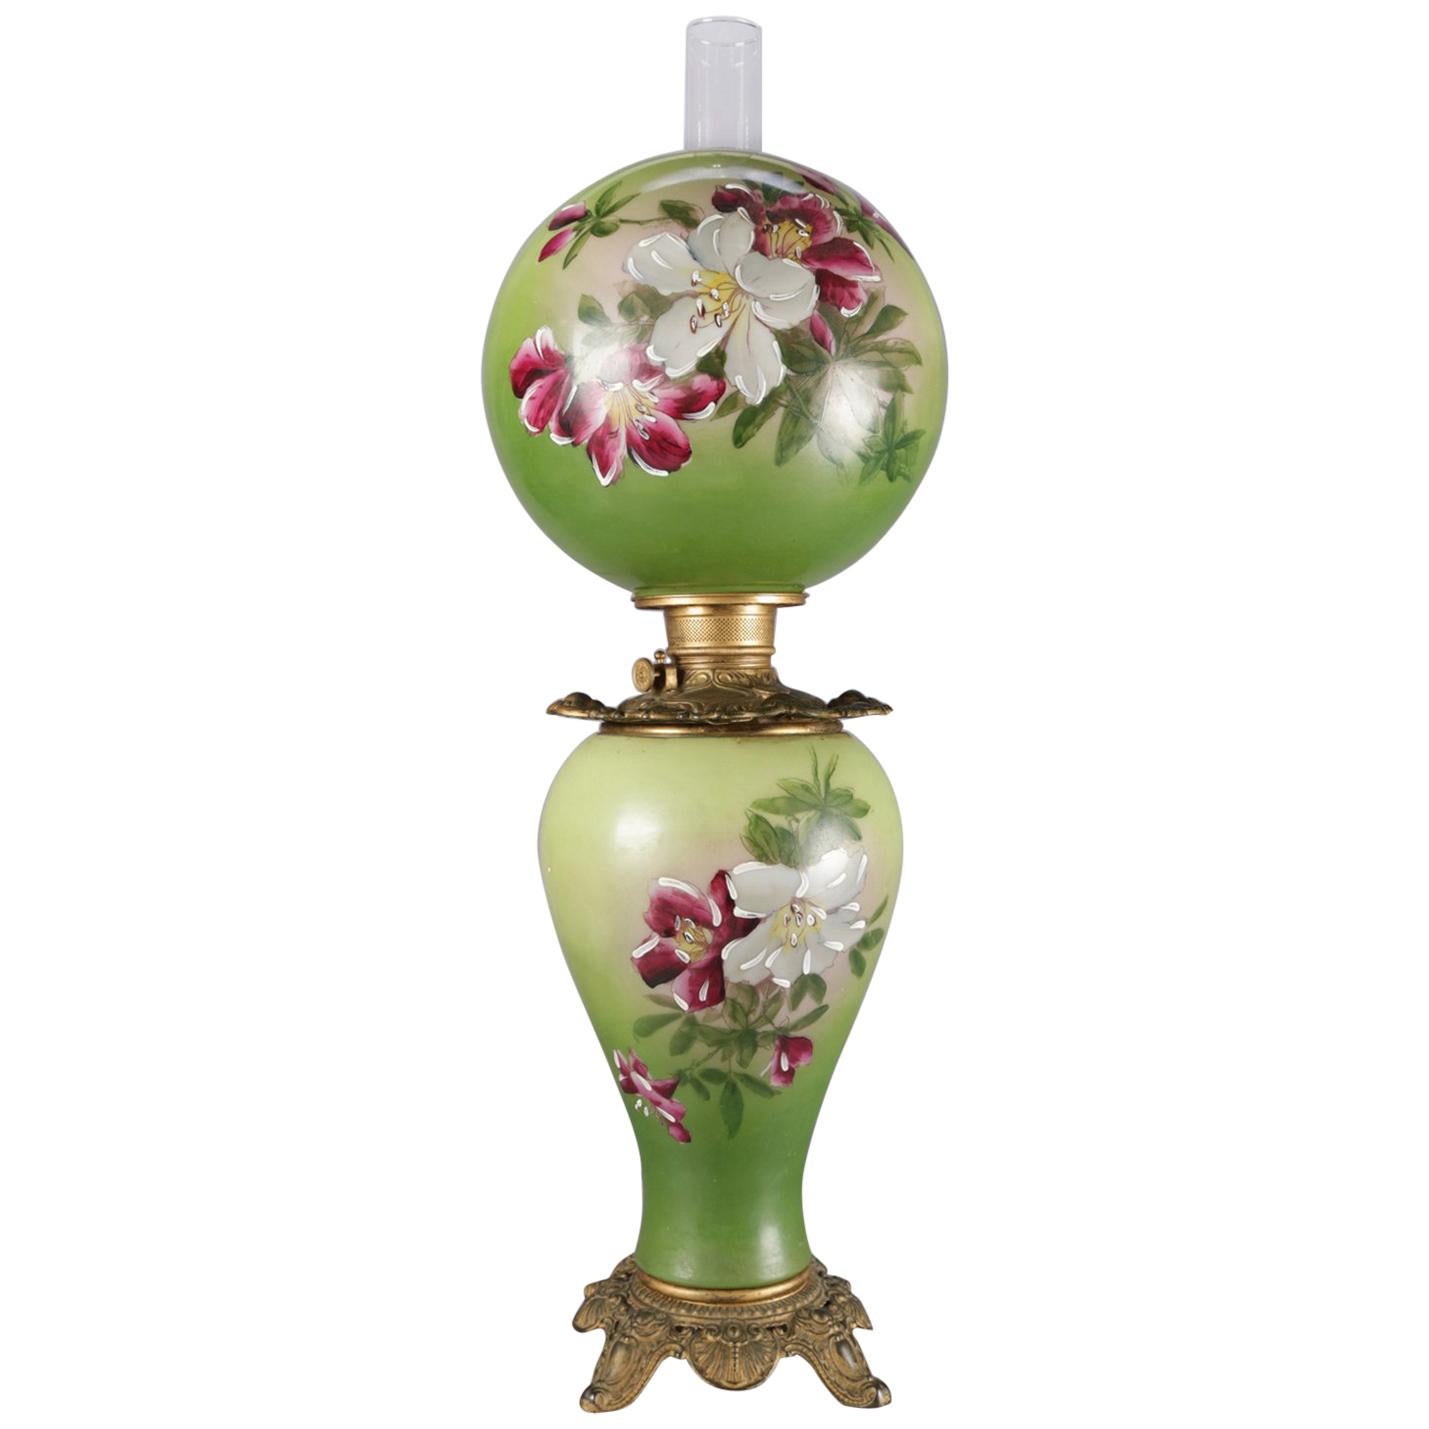 Antique Hand-Painted Lily Gone-with-the-wind Lamp, Electrified, 19th Century